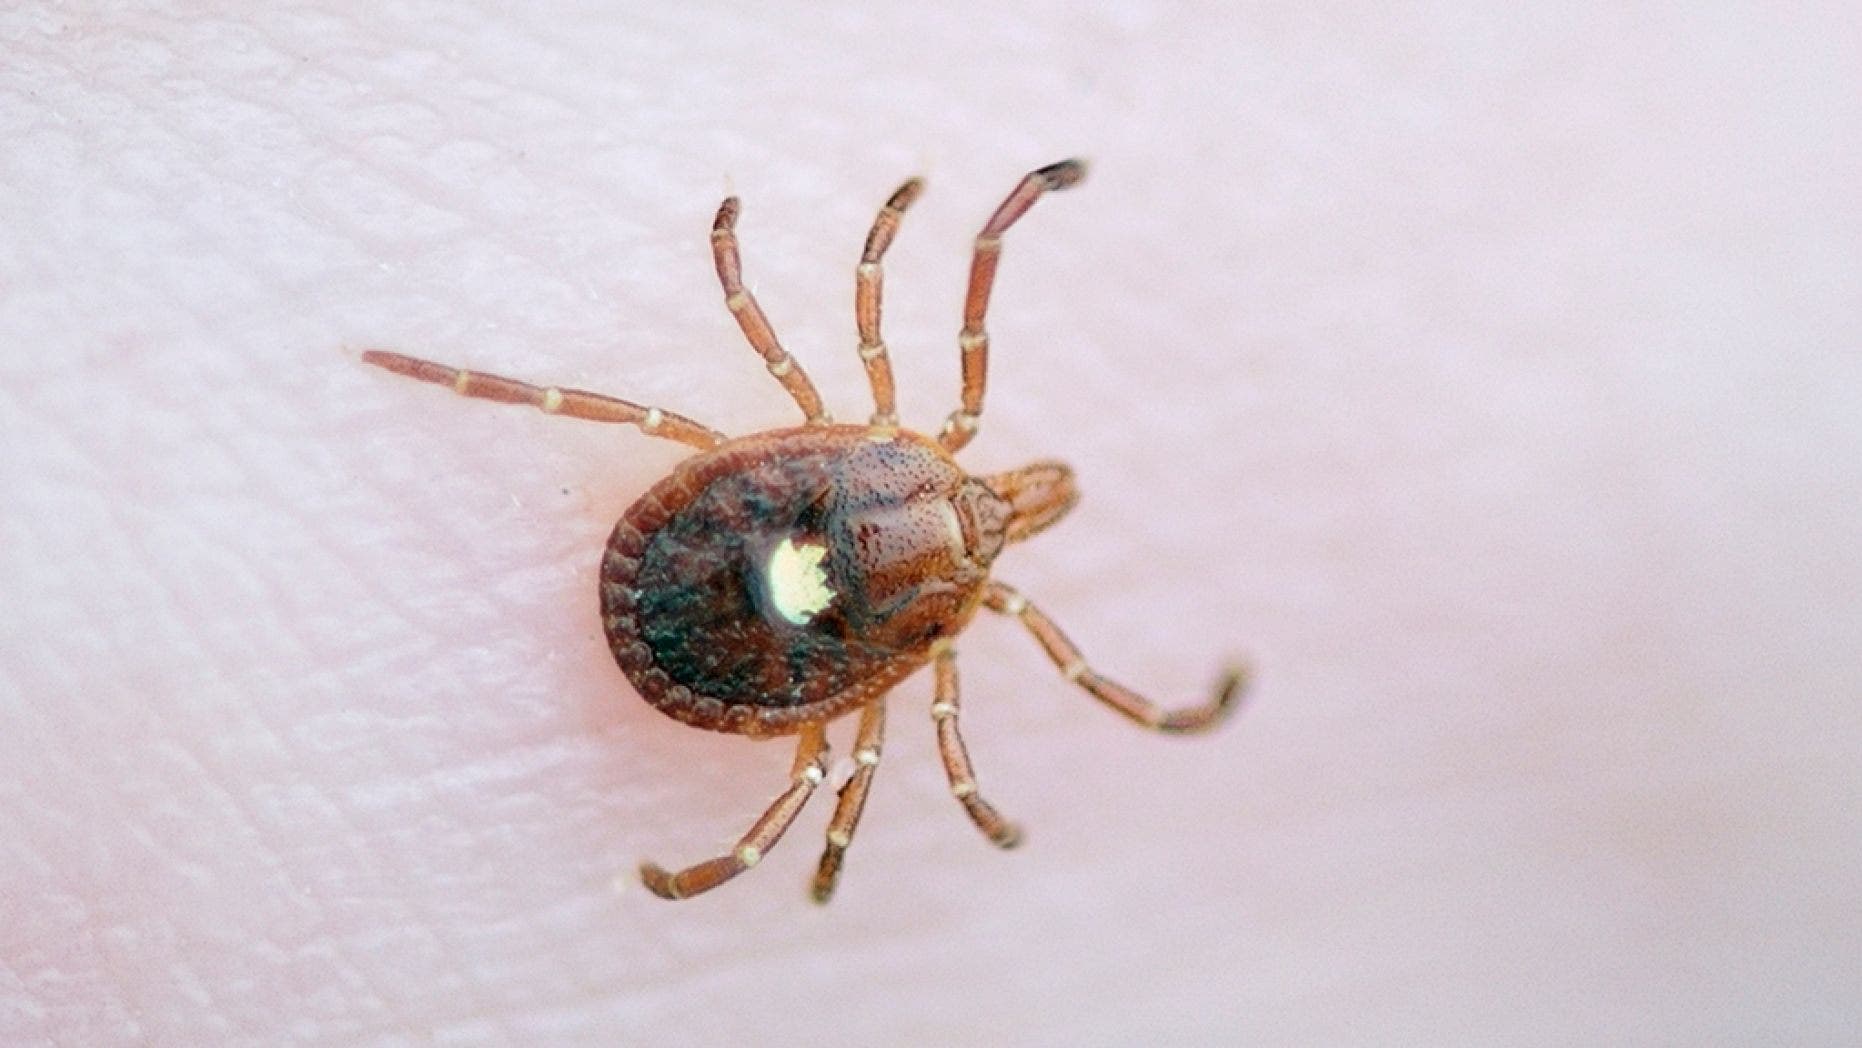 Lone Star tick, known to cause red meat allergy, found in northern Wisconsin: report - Fox News thumbnail